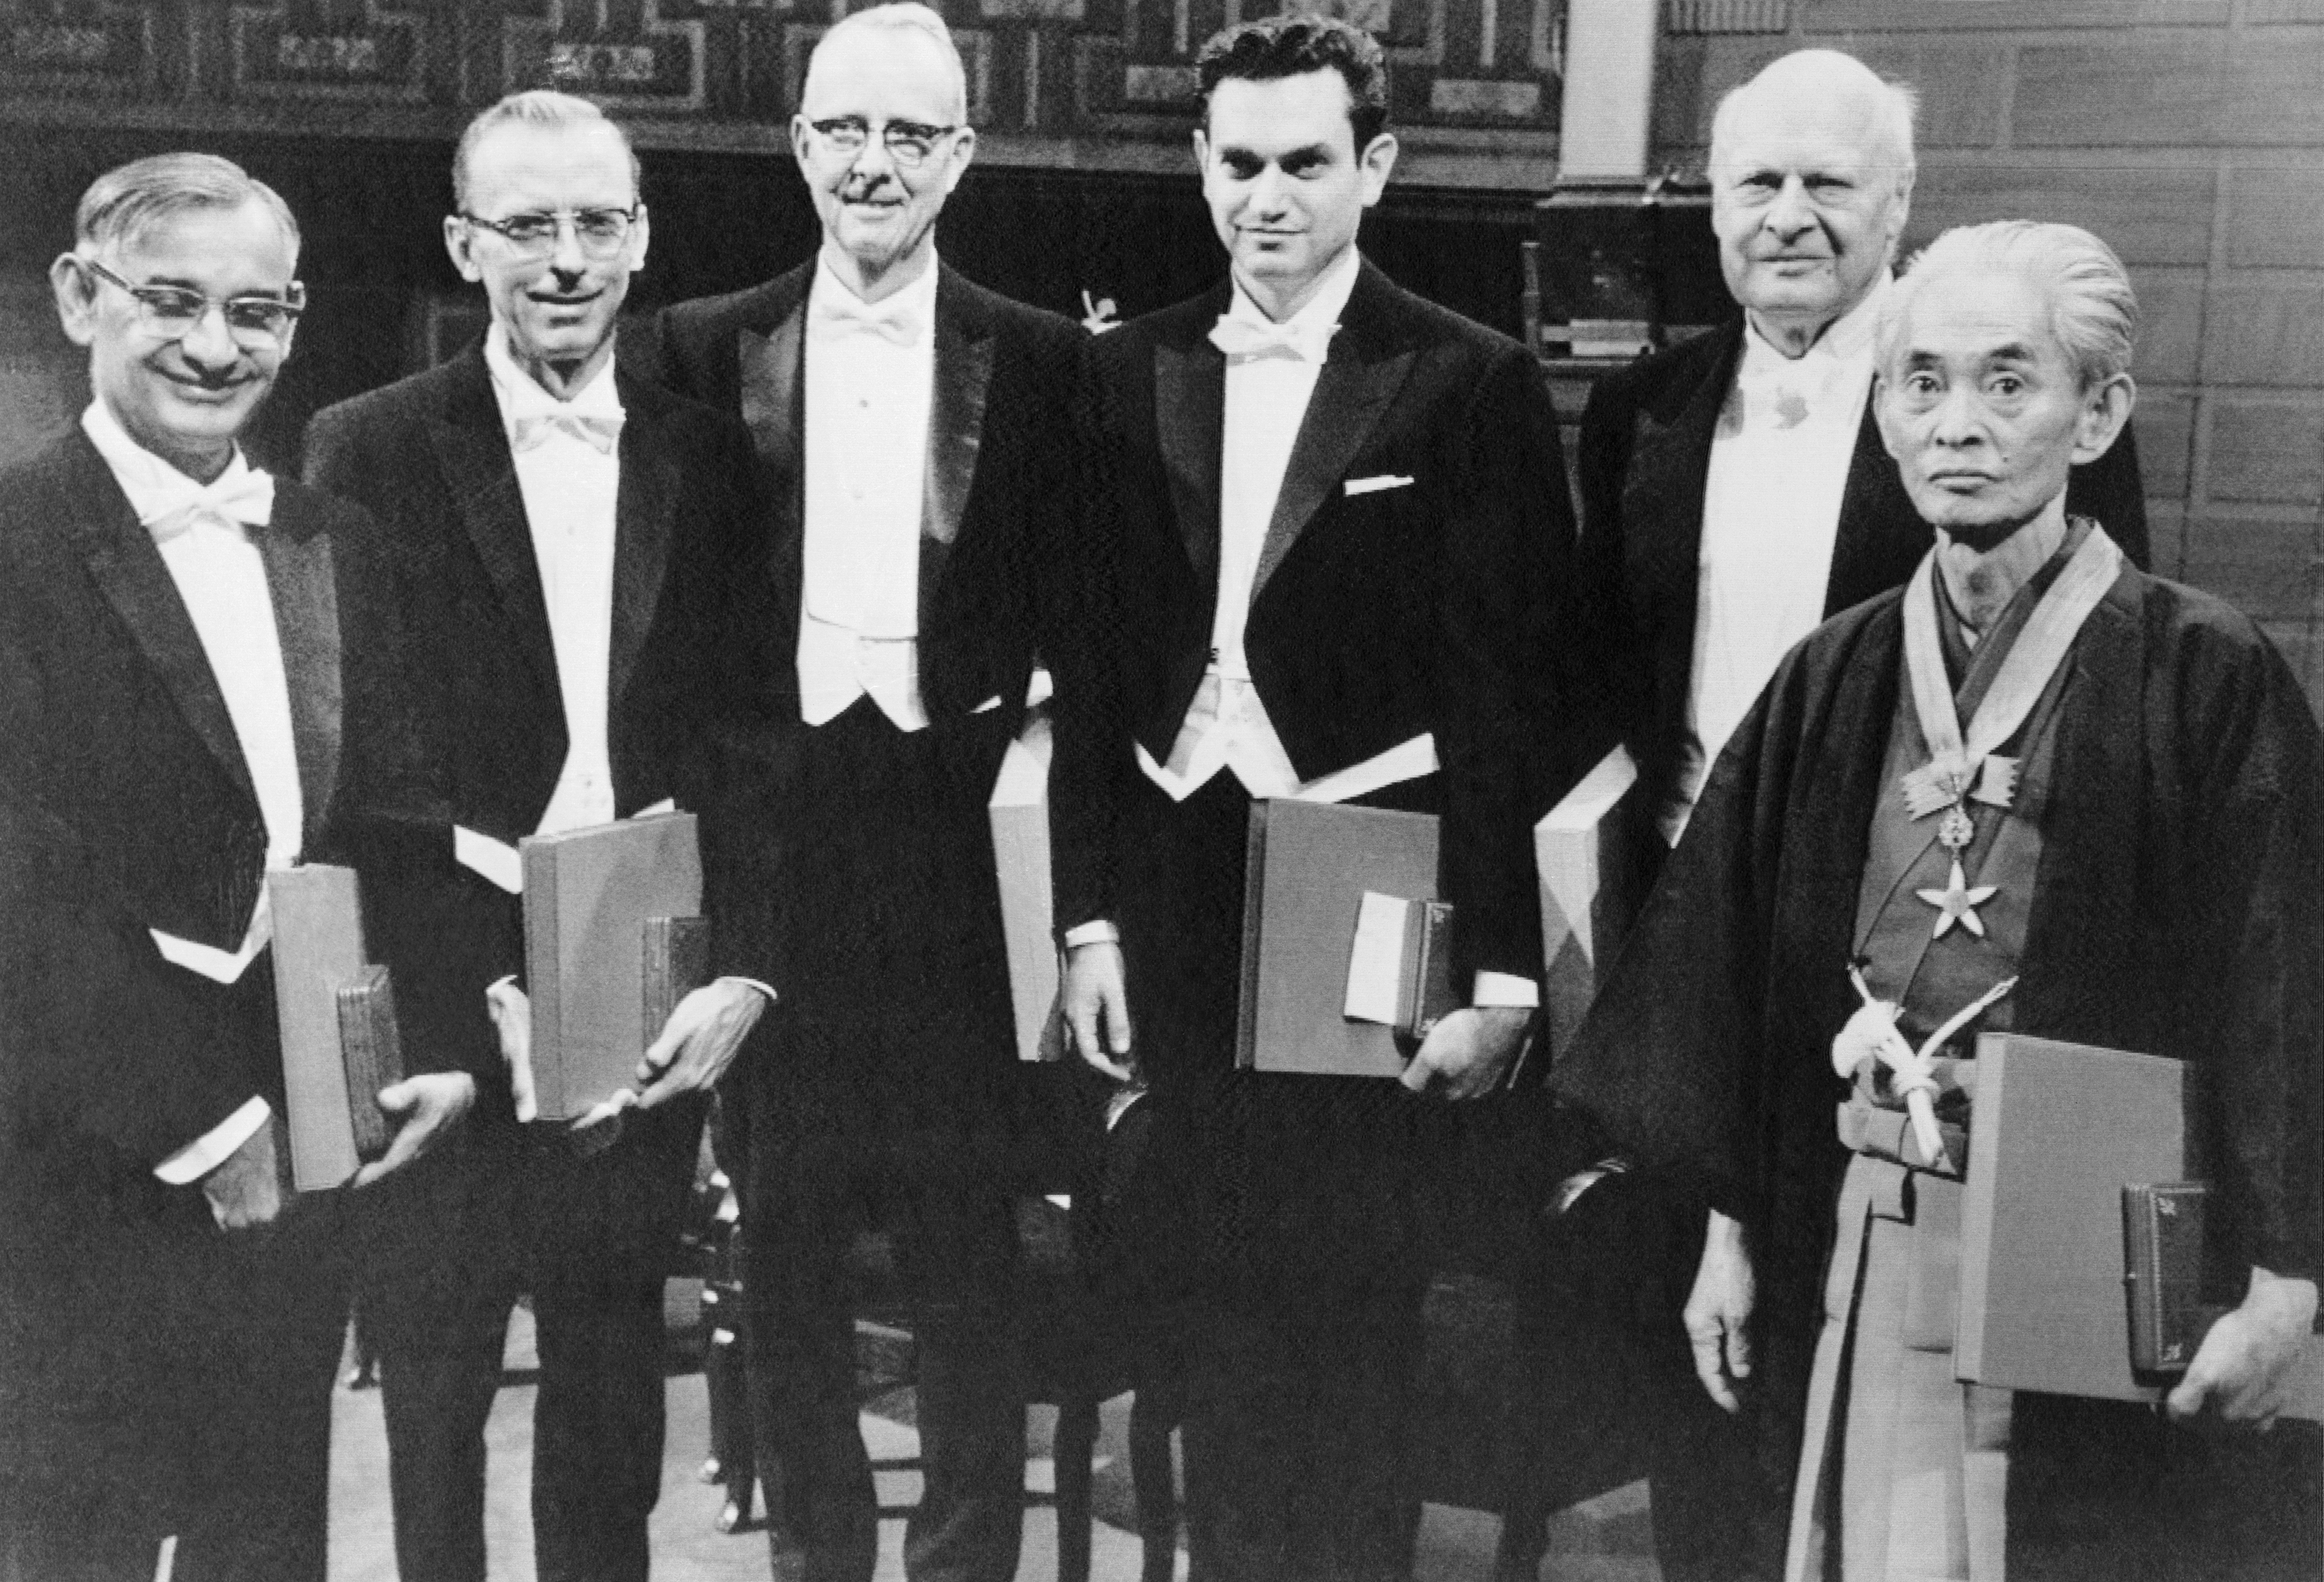 (Original Caption) Nobel Prize Winners. Stockholm: The 1968 Nobel Prize recipients, five Americans and one Japanese where judged to have "most benefited mankind" in the past year. They appear here at the awards ceremony. Left to right: Professor H. Gobind Khorana, Robert W. Holley, Professor Luis W. Alvarez, Dr. Marshall W. Nirenberg, Lars Onsager and Japanese author Yasunari Kawabata. (Bettmann—Bettmann Archive)